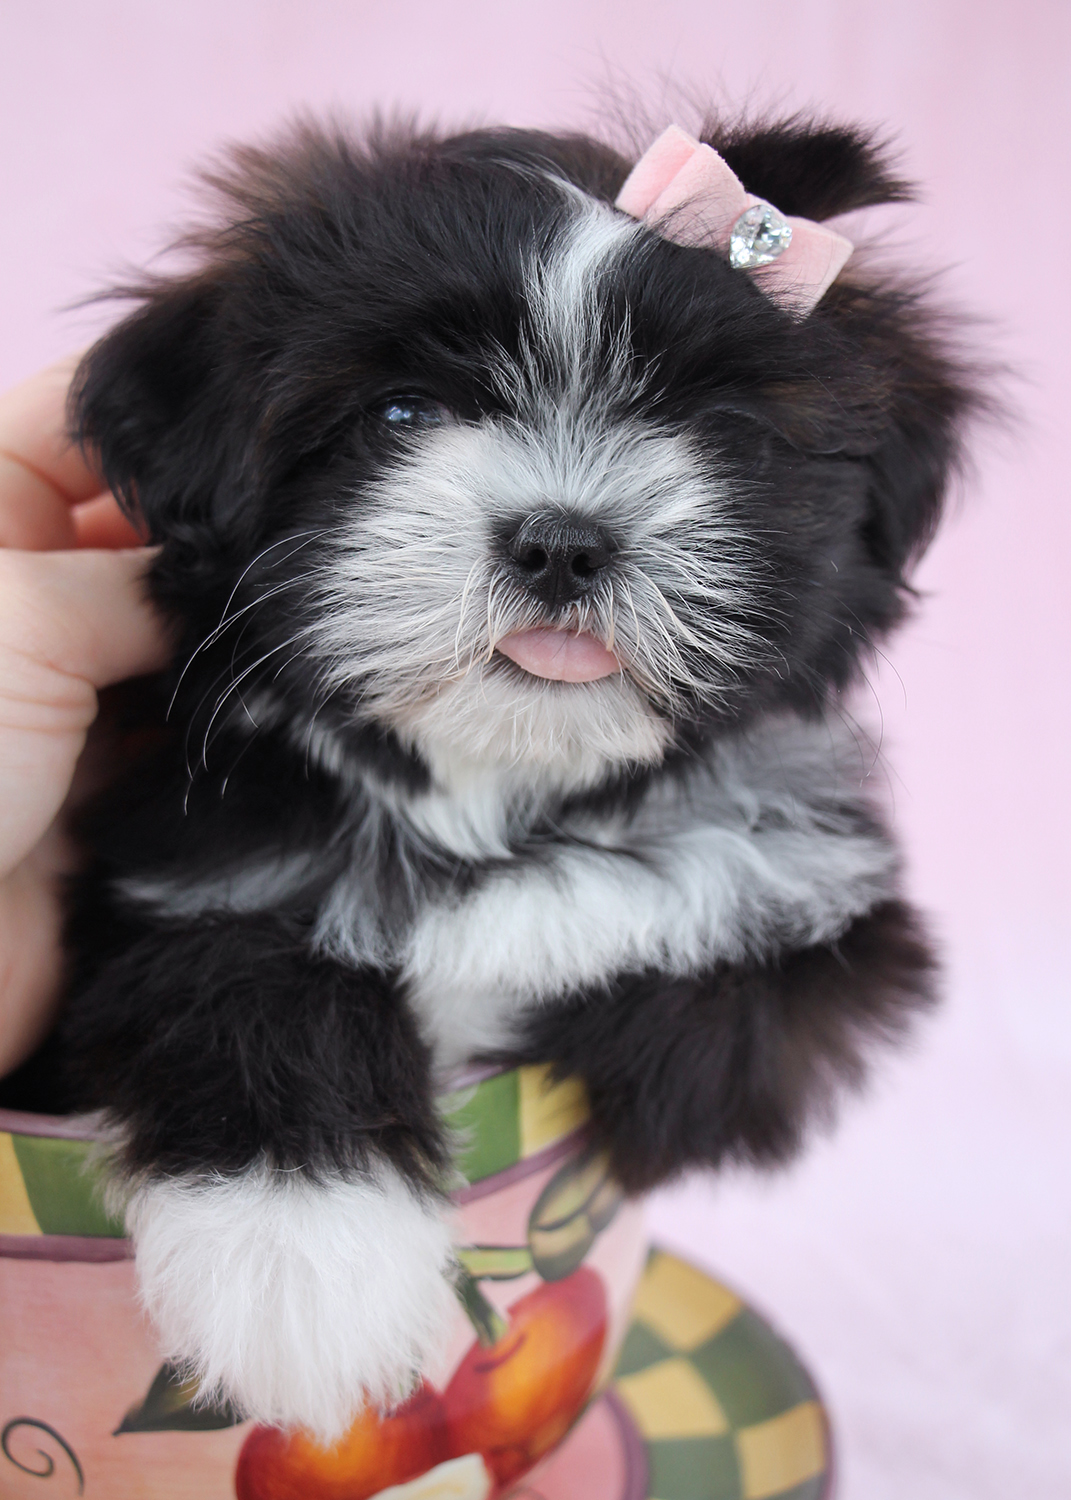 Shih Tzu Puppies For Sale at Teacups in South Florida ...